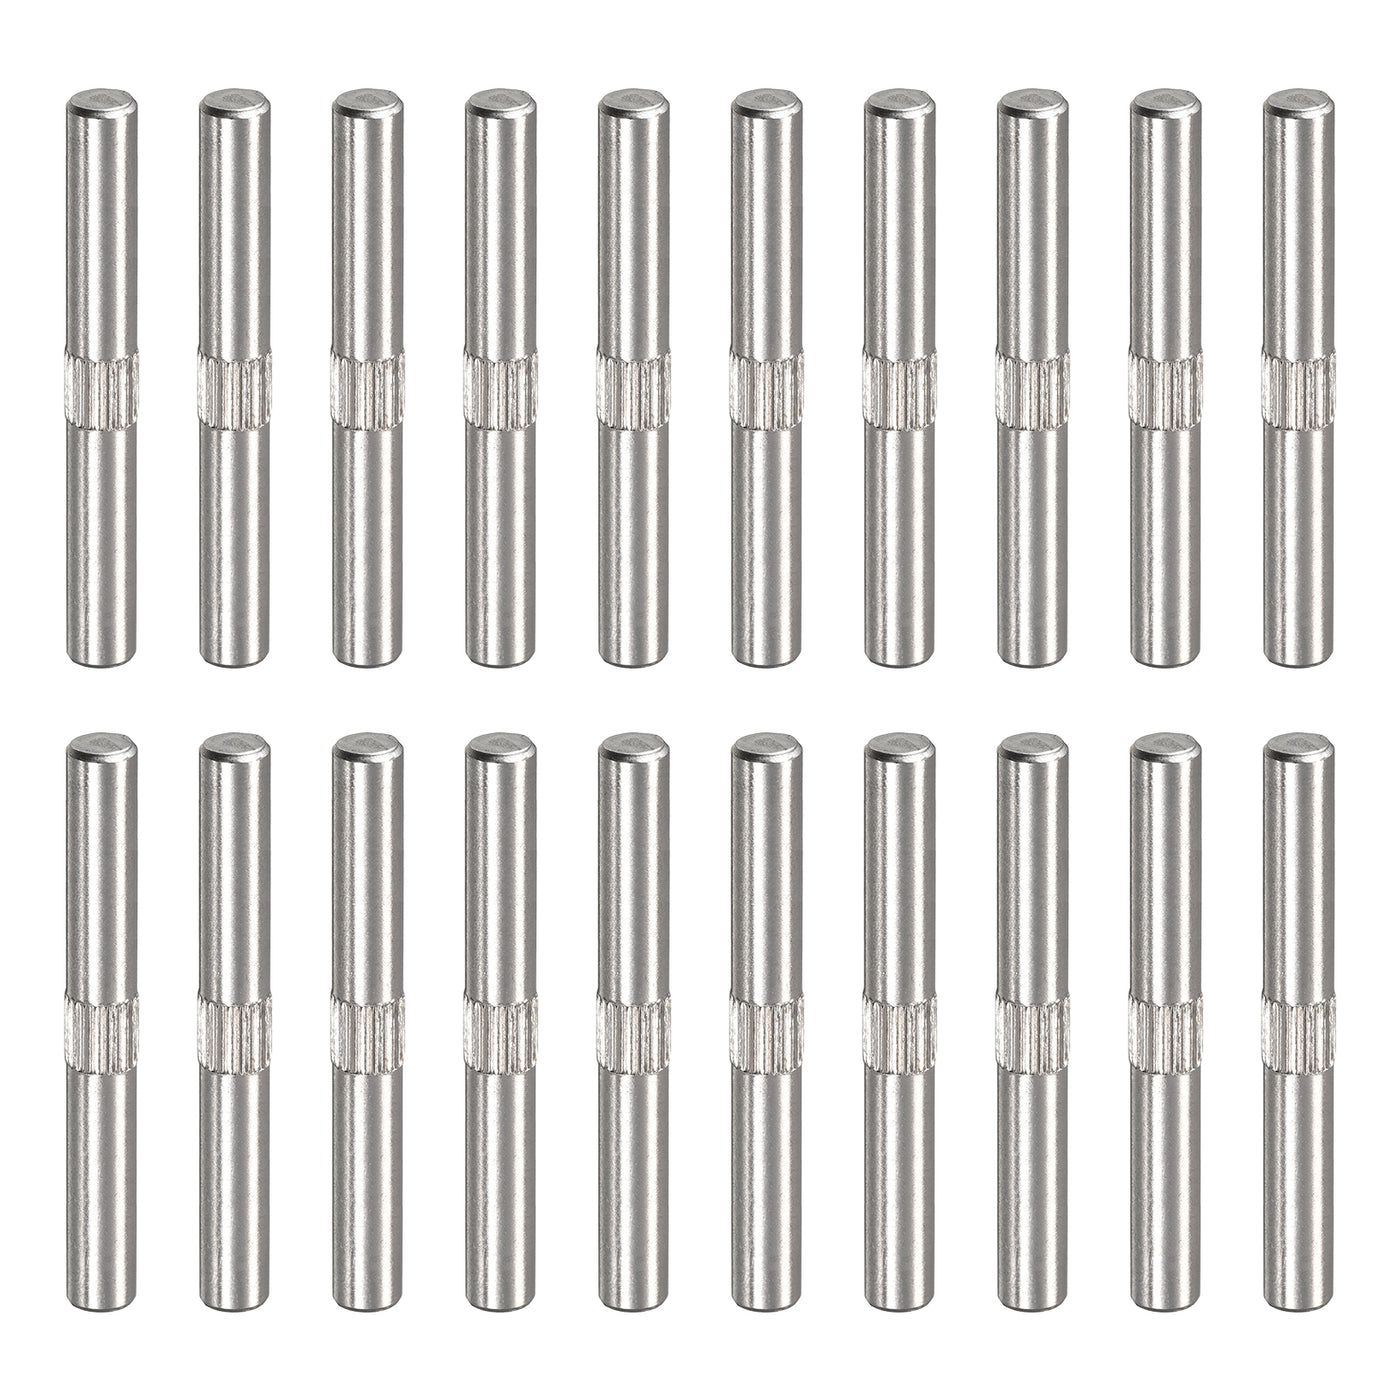 uxcell Uxcell 5x40mm 304 Stainless Steel Dowel Pins, 20Pcs Center Knurled Chamfered End Pin